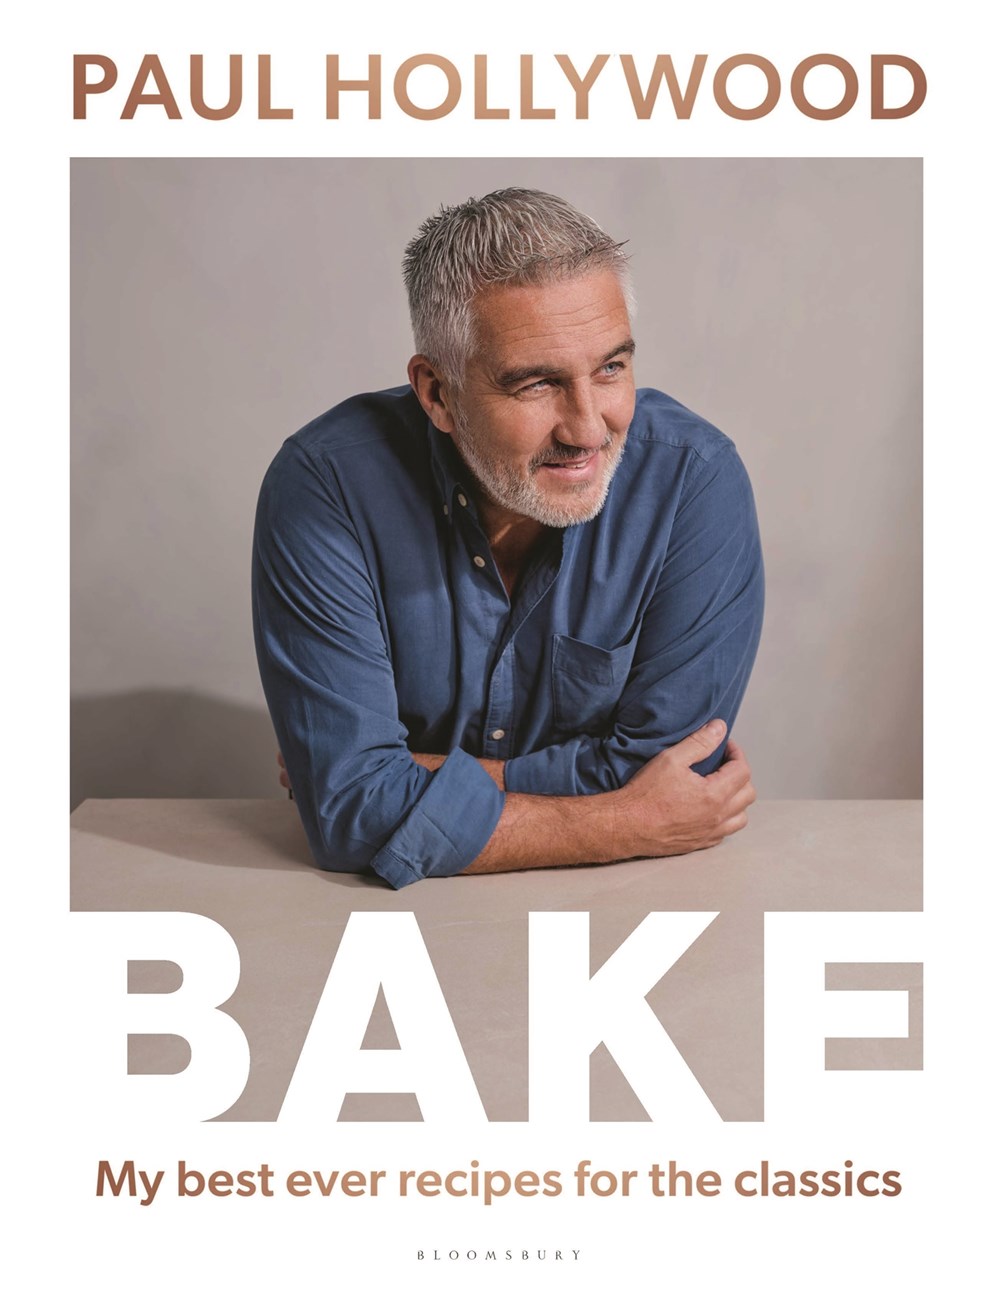 BAKE: My Best Ever Recipes for the Classics